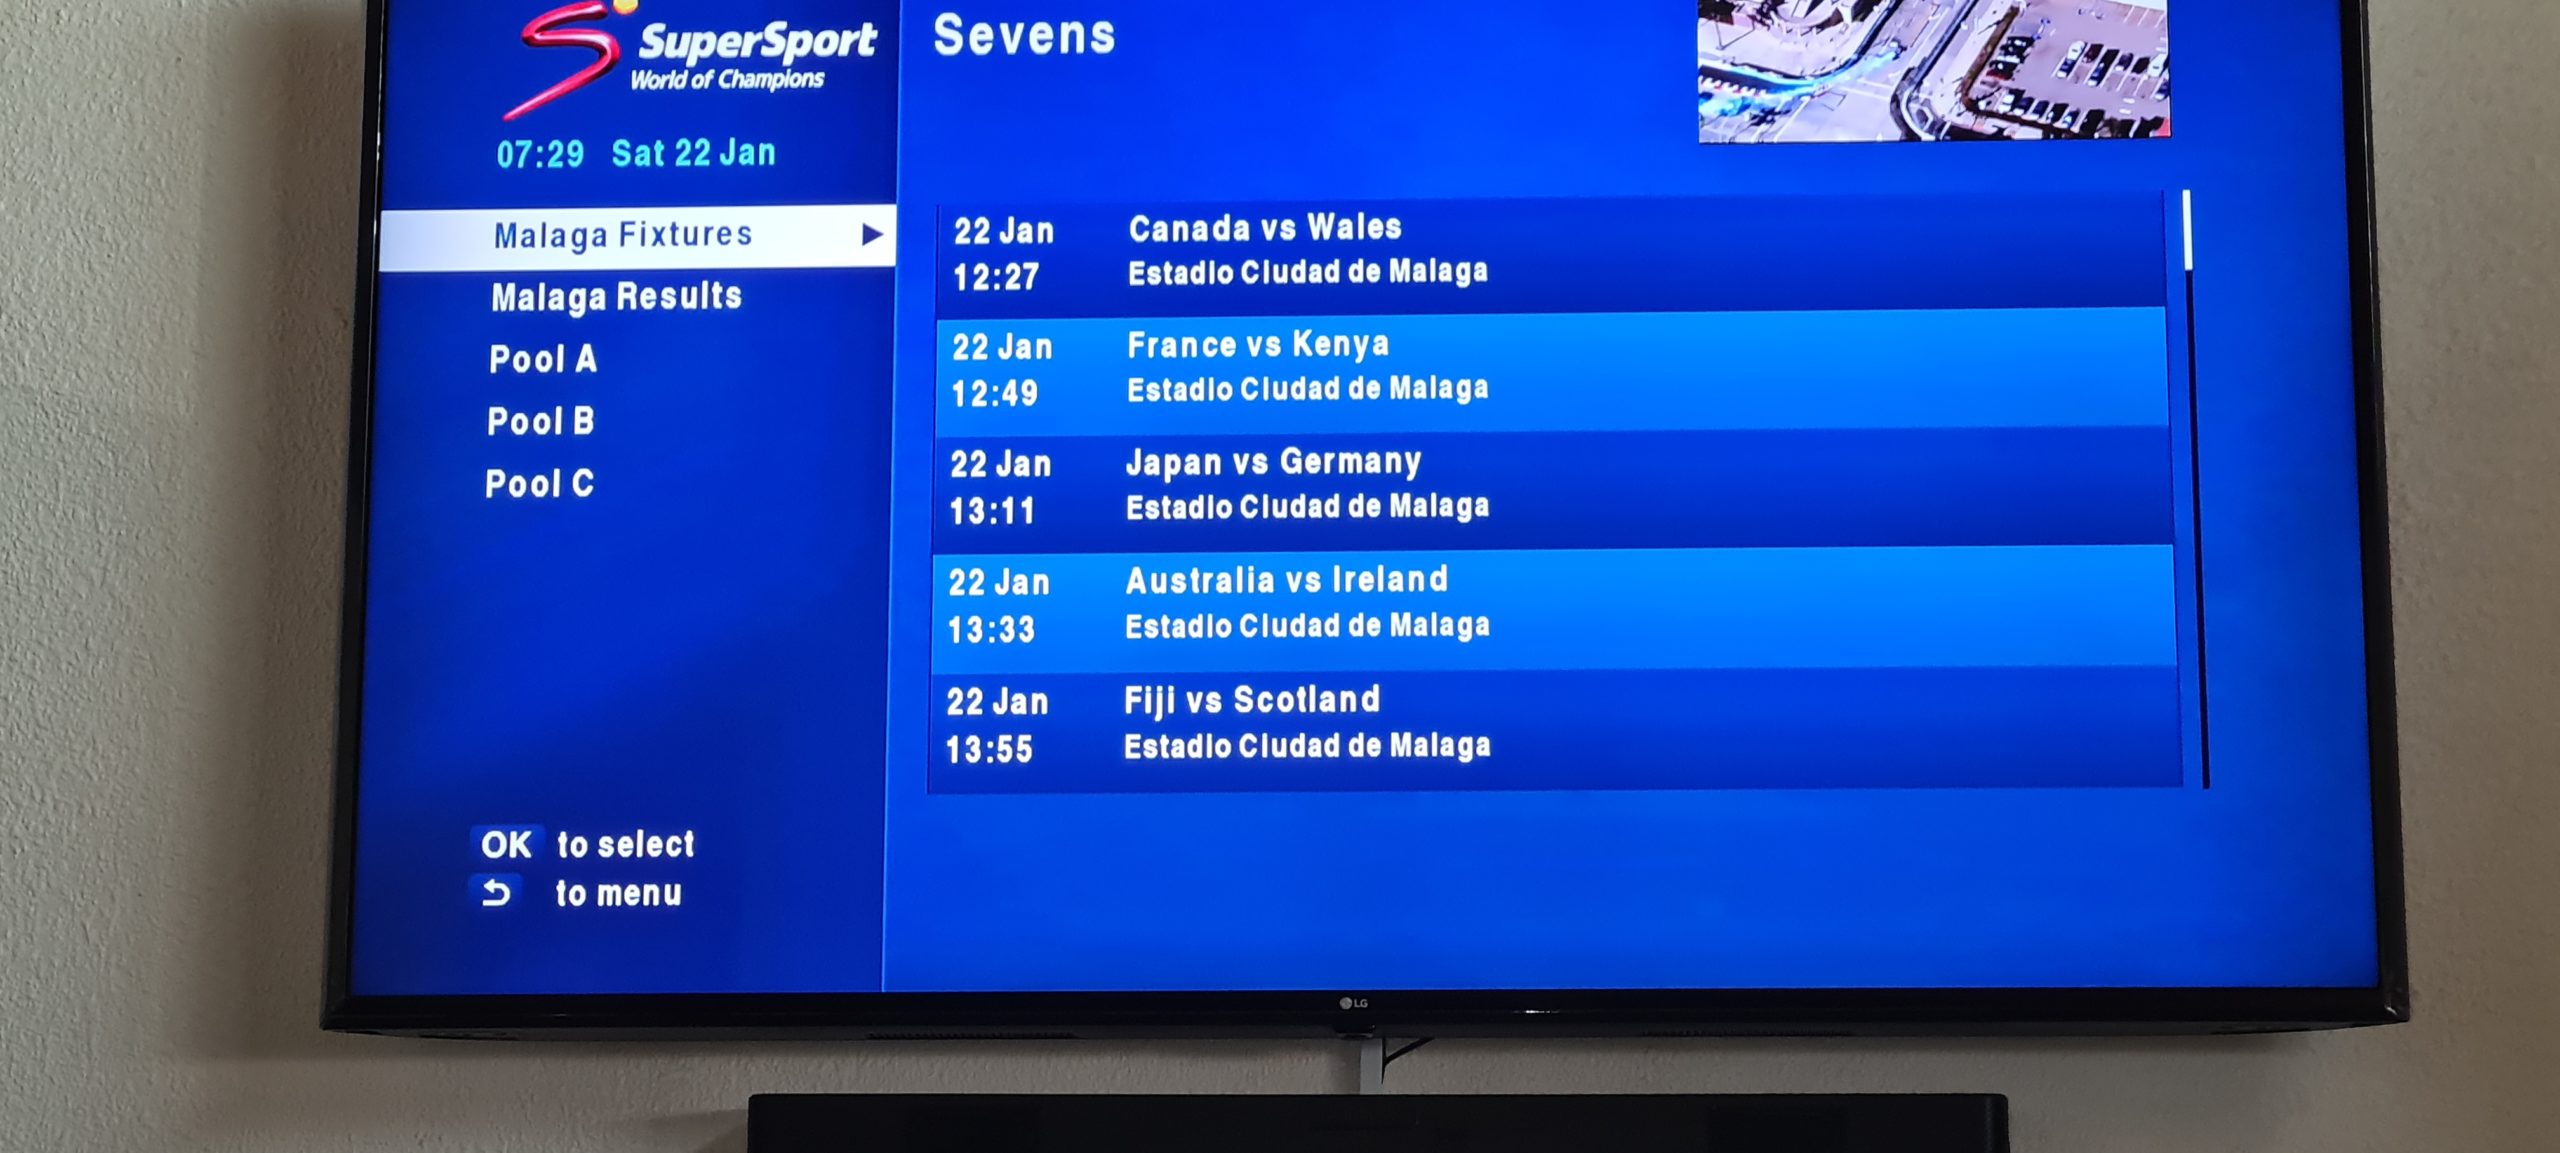 SuperSport complaint InaccurateIncomplete information